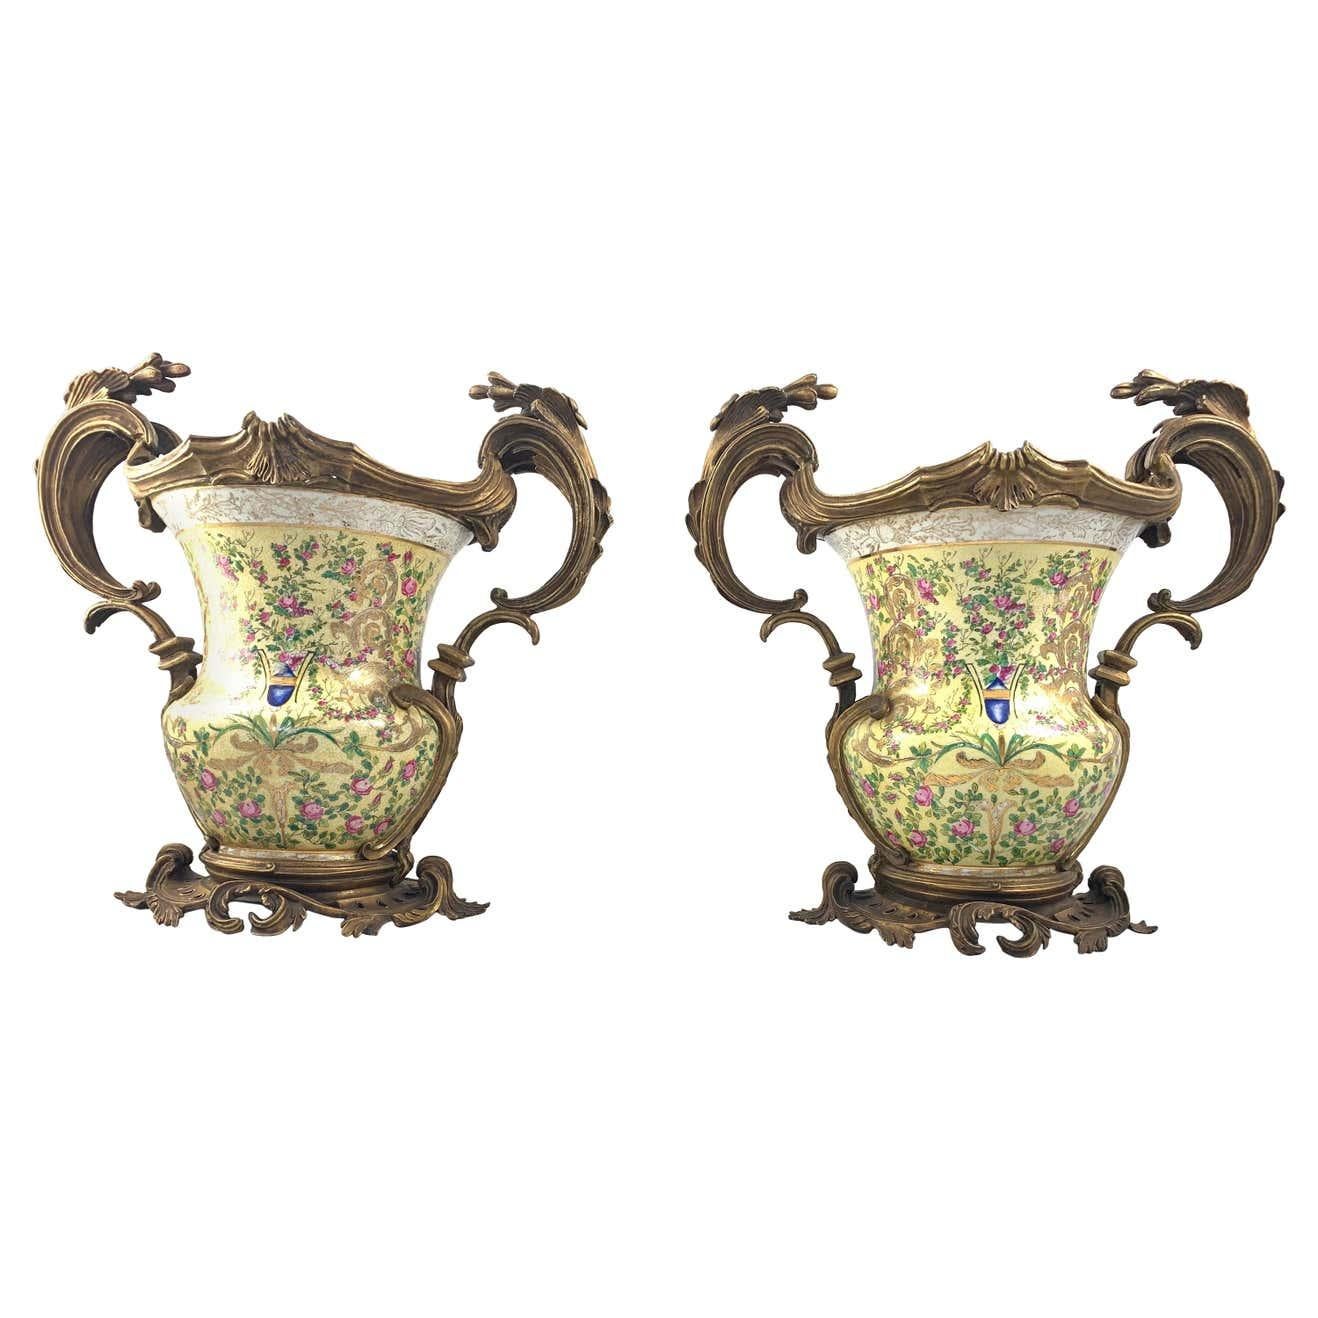 A fine pair of French porcelain and ormolu-mounted twin handled urns. Each heavy baluster body decorated with a coat of arms amongst flowers and foliage. The mounts conforming in design and supported by an impressive scroll cast base.